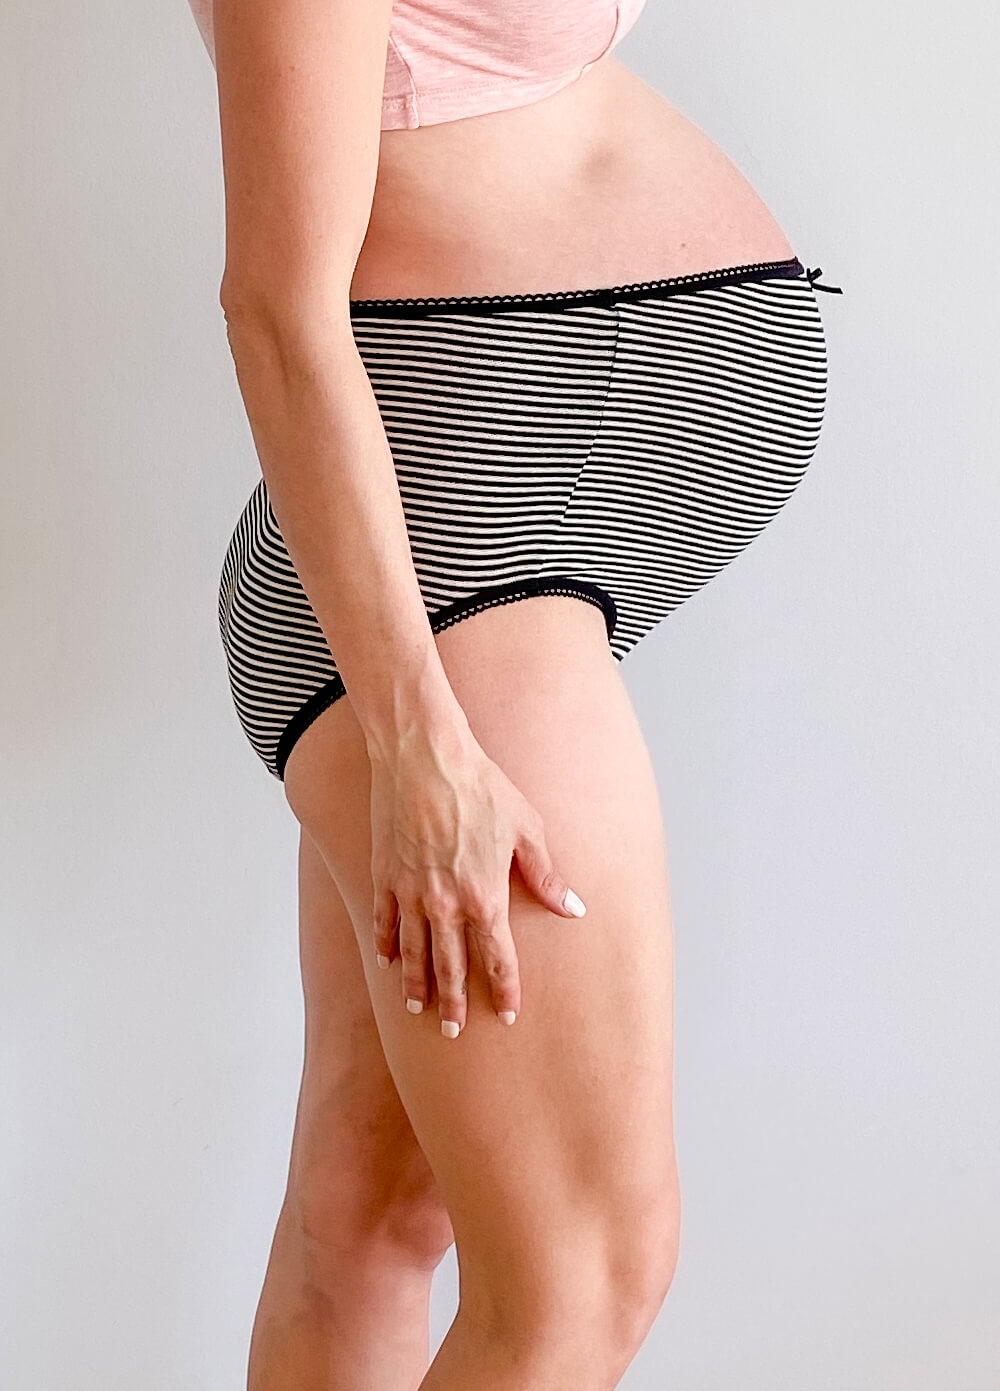 Queen Bee - Evelina 3-pack Maternity Briefs in Black Stripes